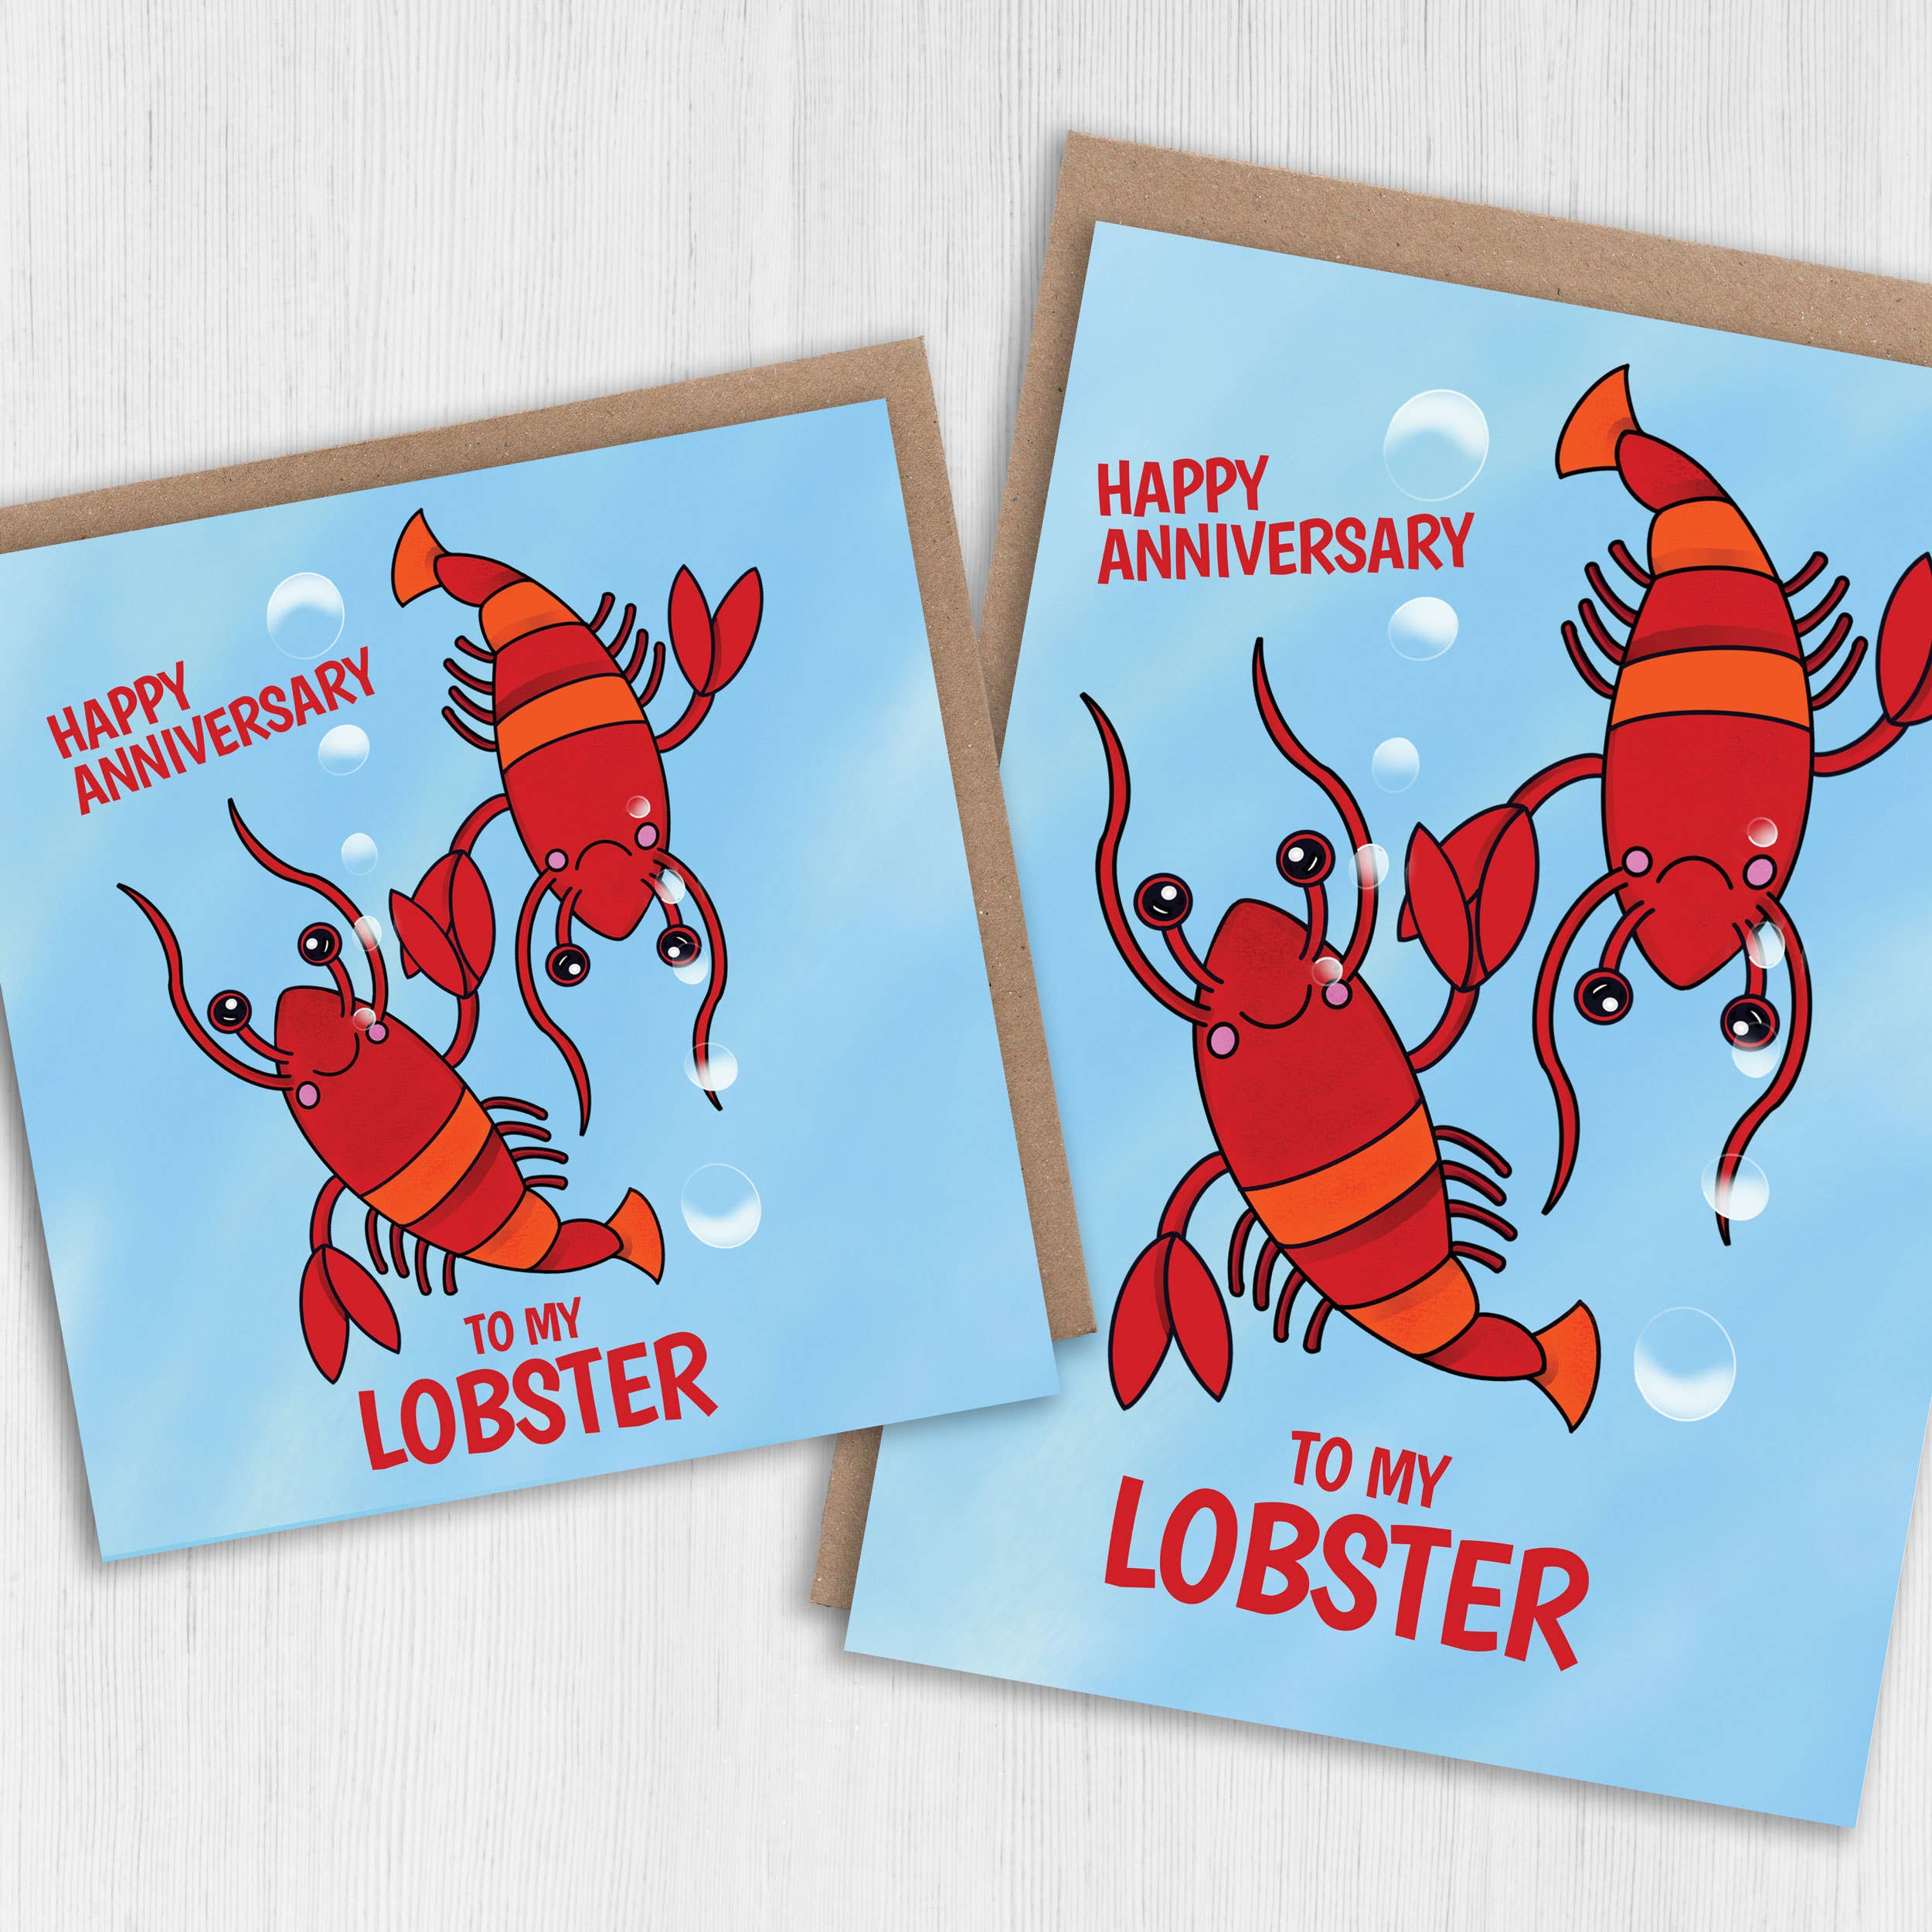 Lobster anniversary card: Happy anniversary to my lobster